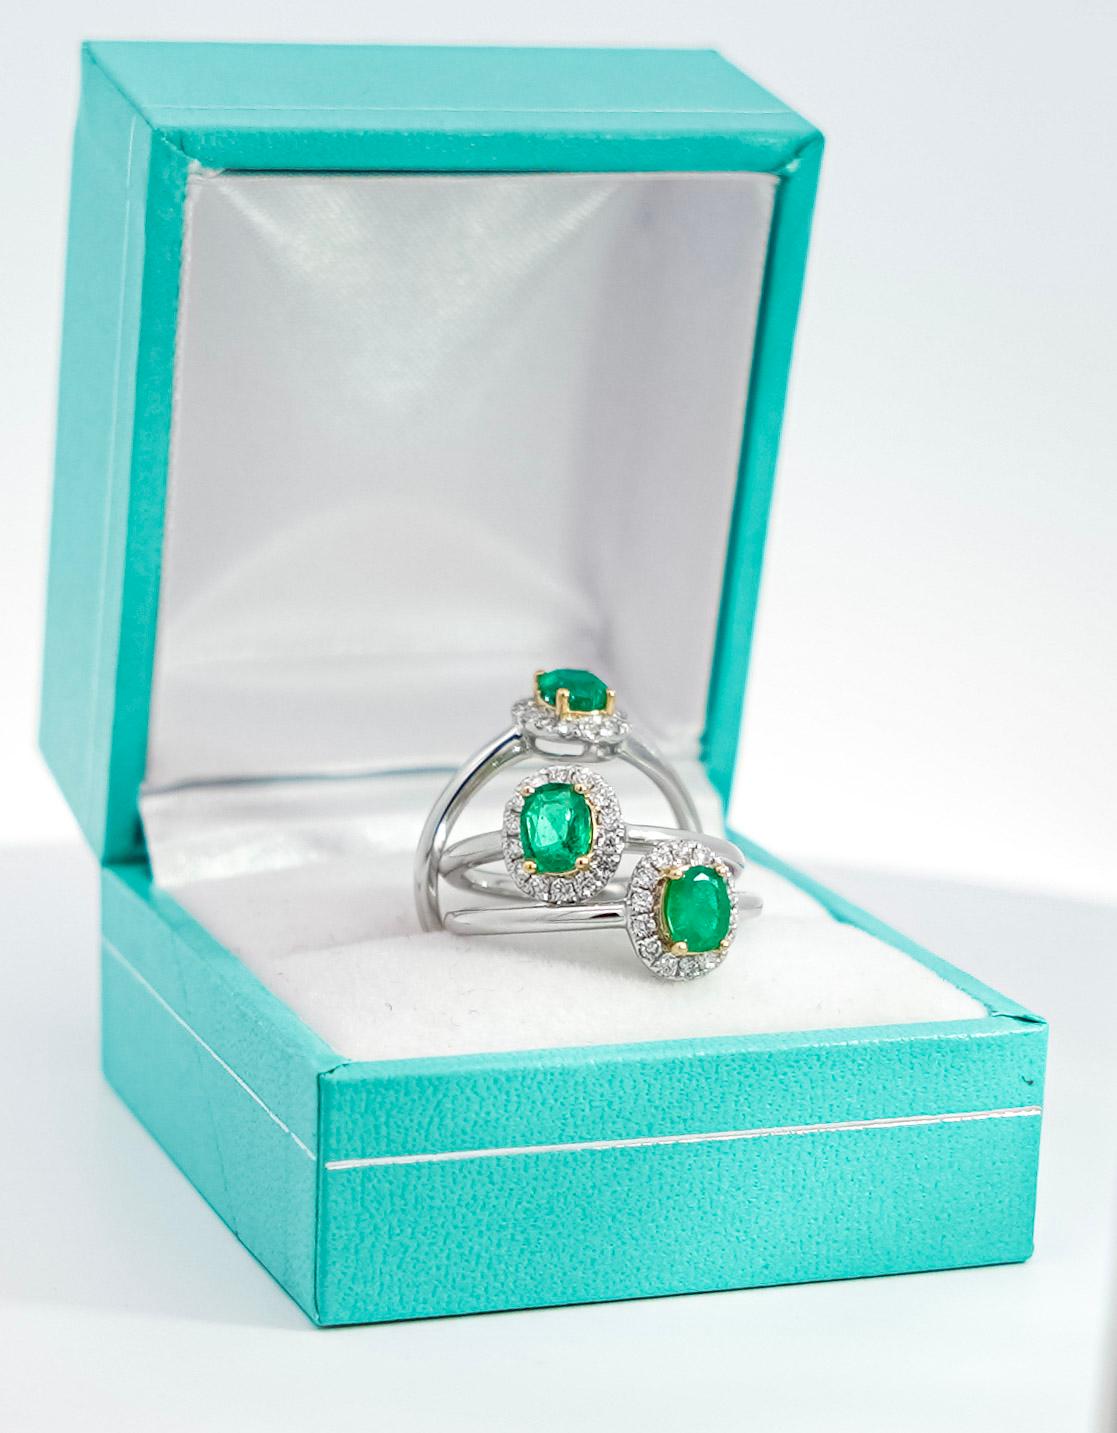 Natural Green Emerald and Natural Diamond Ring, Set in 18K Solid White Gold. The perfect natural gemstone emerald ring that doesn't break the bank.

Featuring a vivid oval cut green natural Emerald and round cut diamond side stones that form a halo.